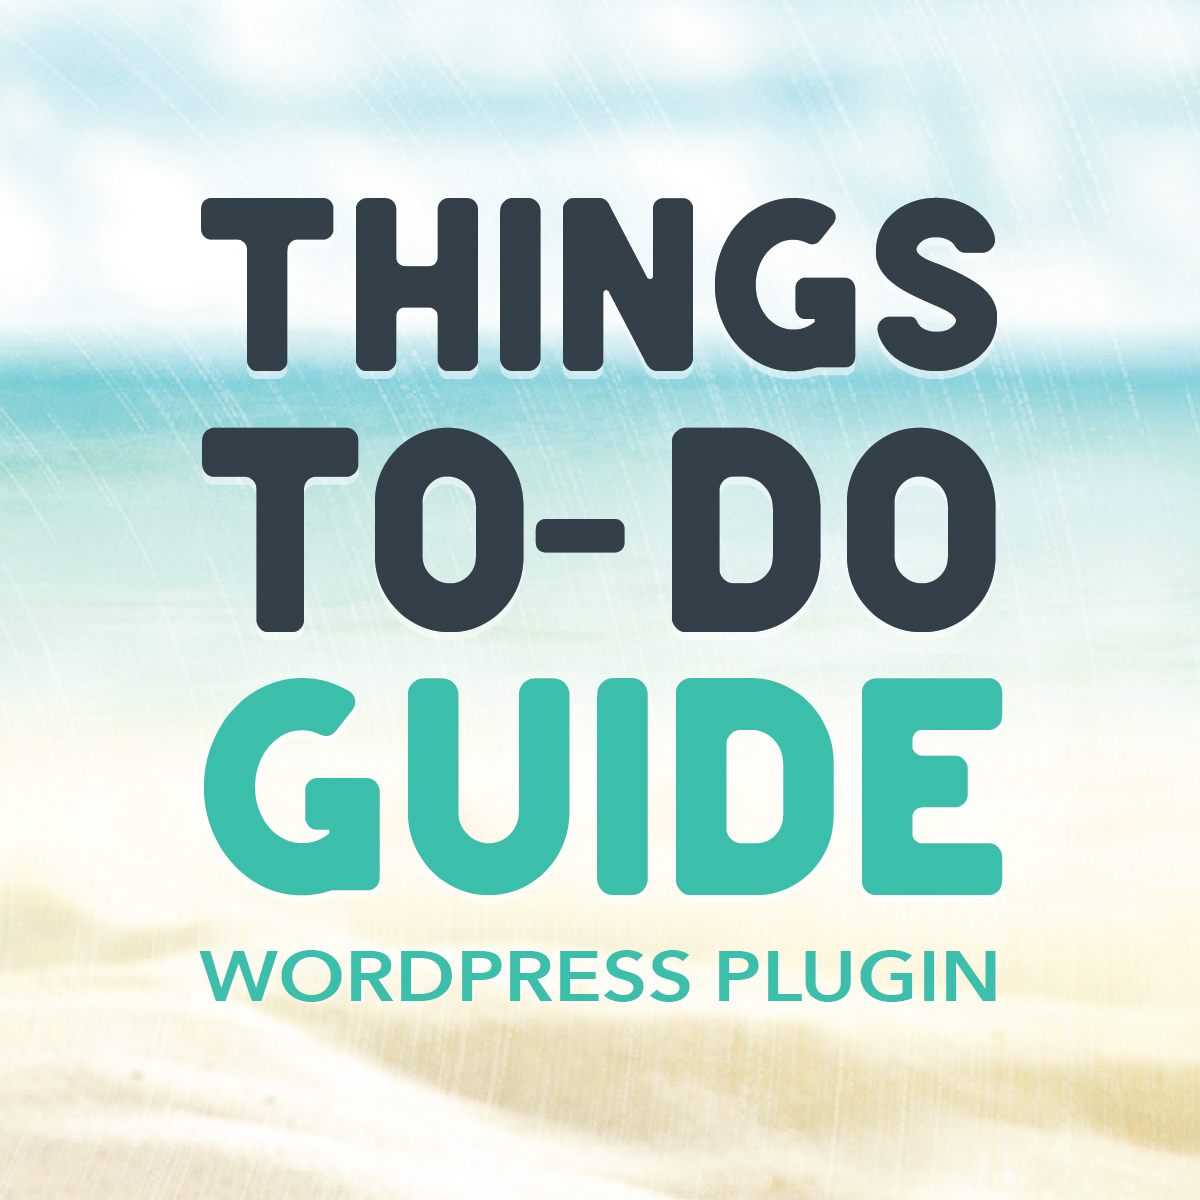 Things To Do Guide Plugin